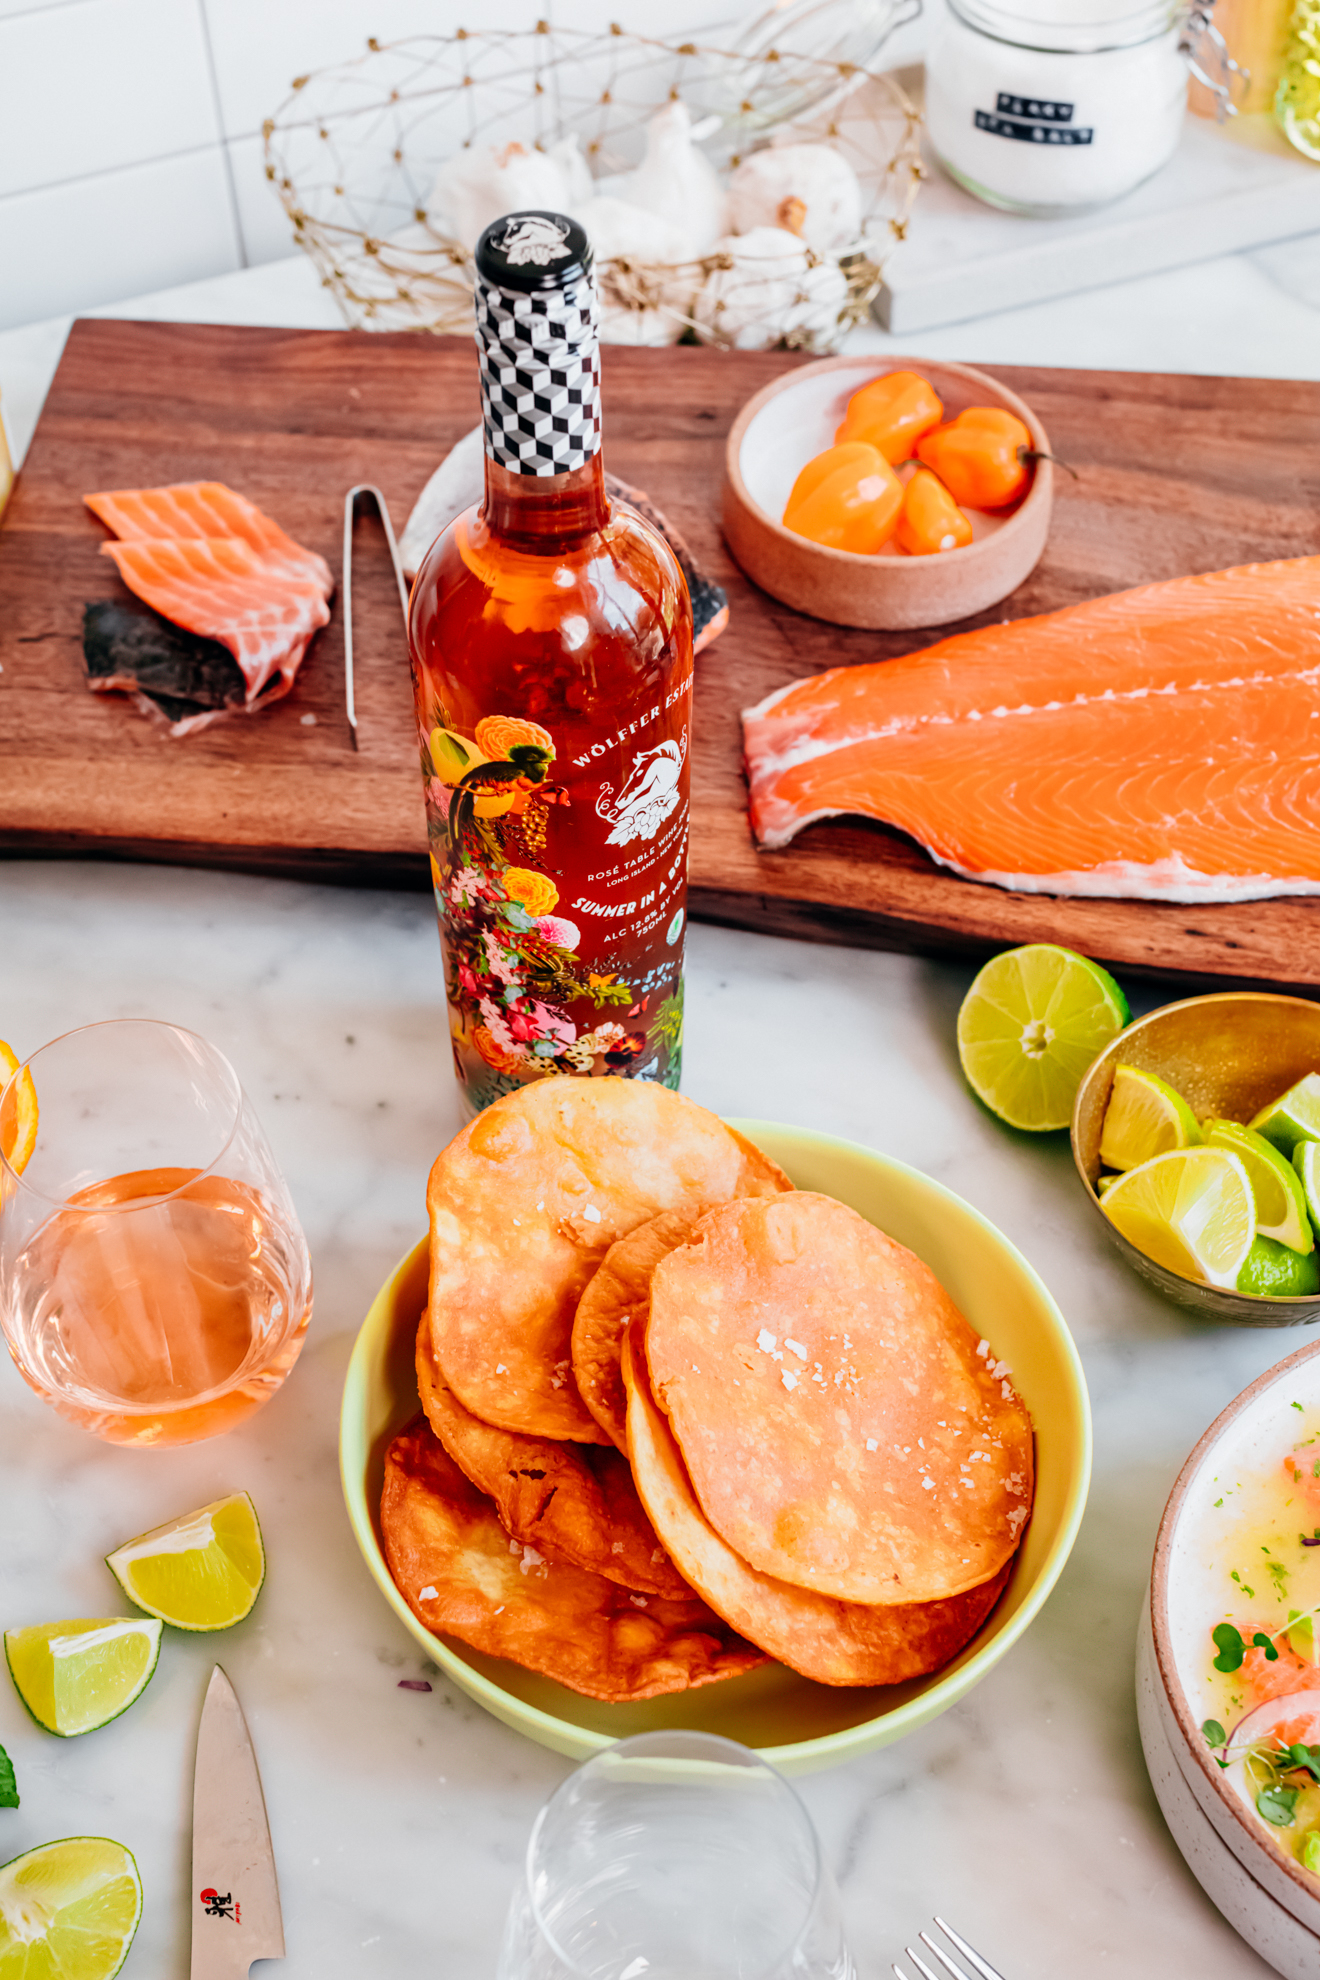 Bluehouse Salmon Ceviche with Avocado and Citrus